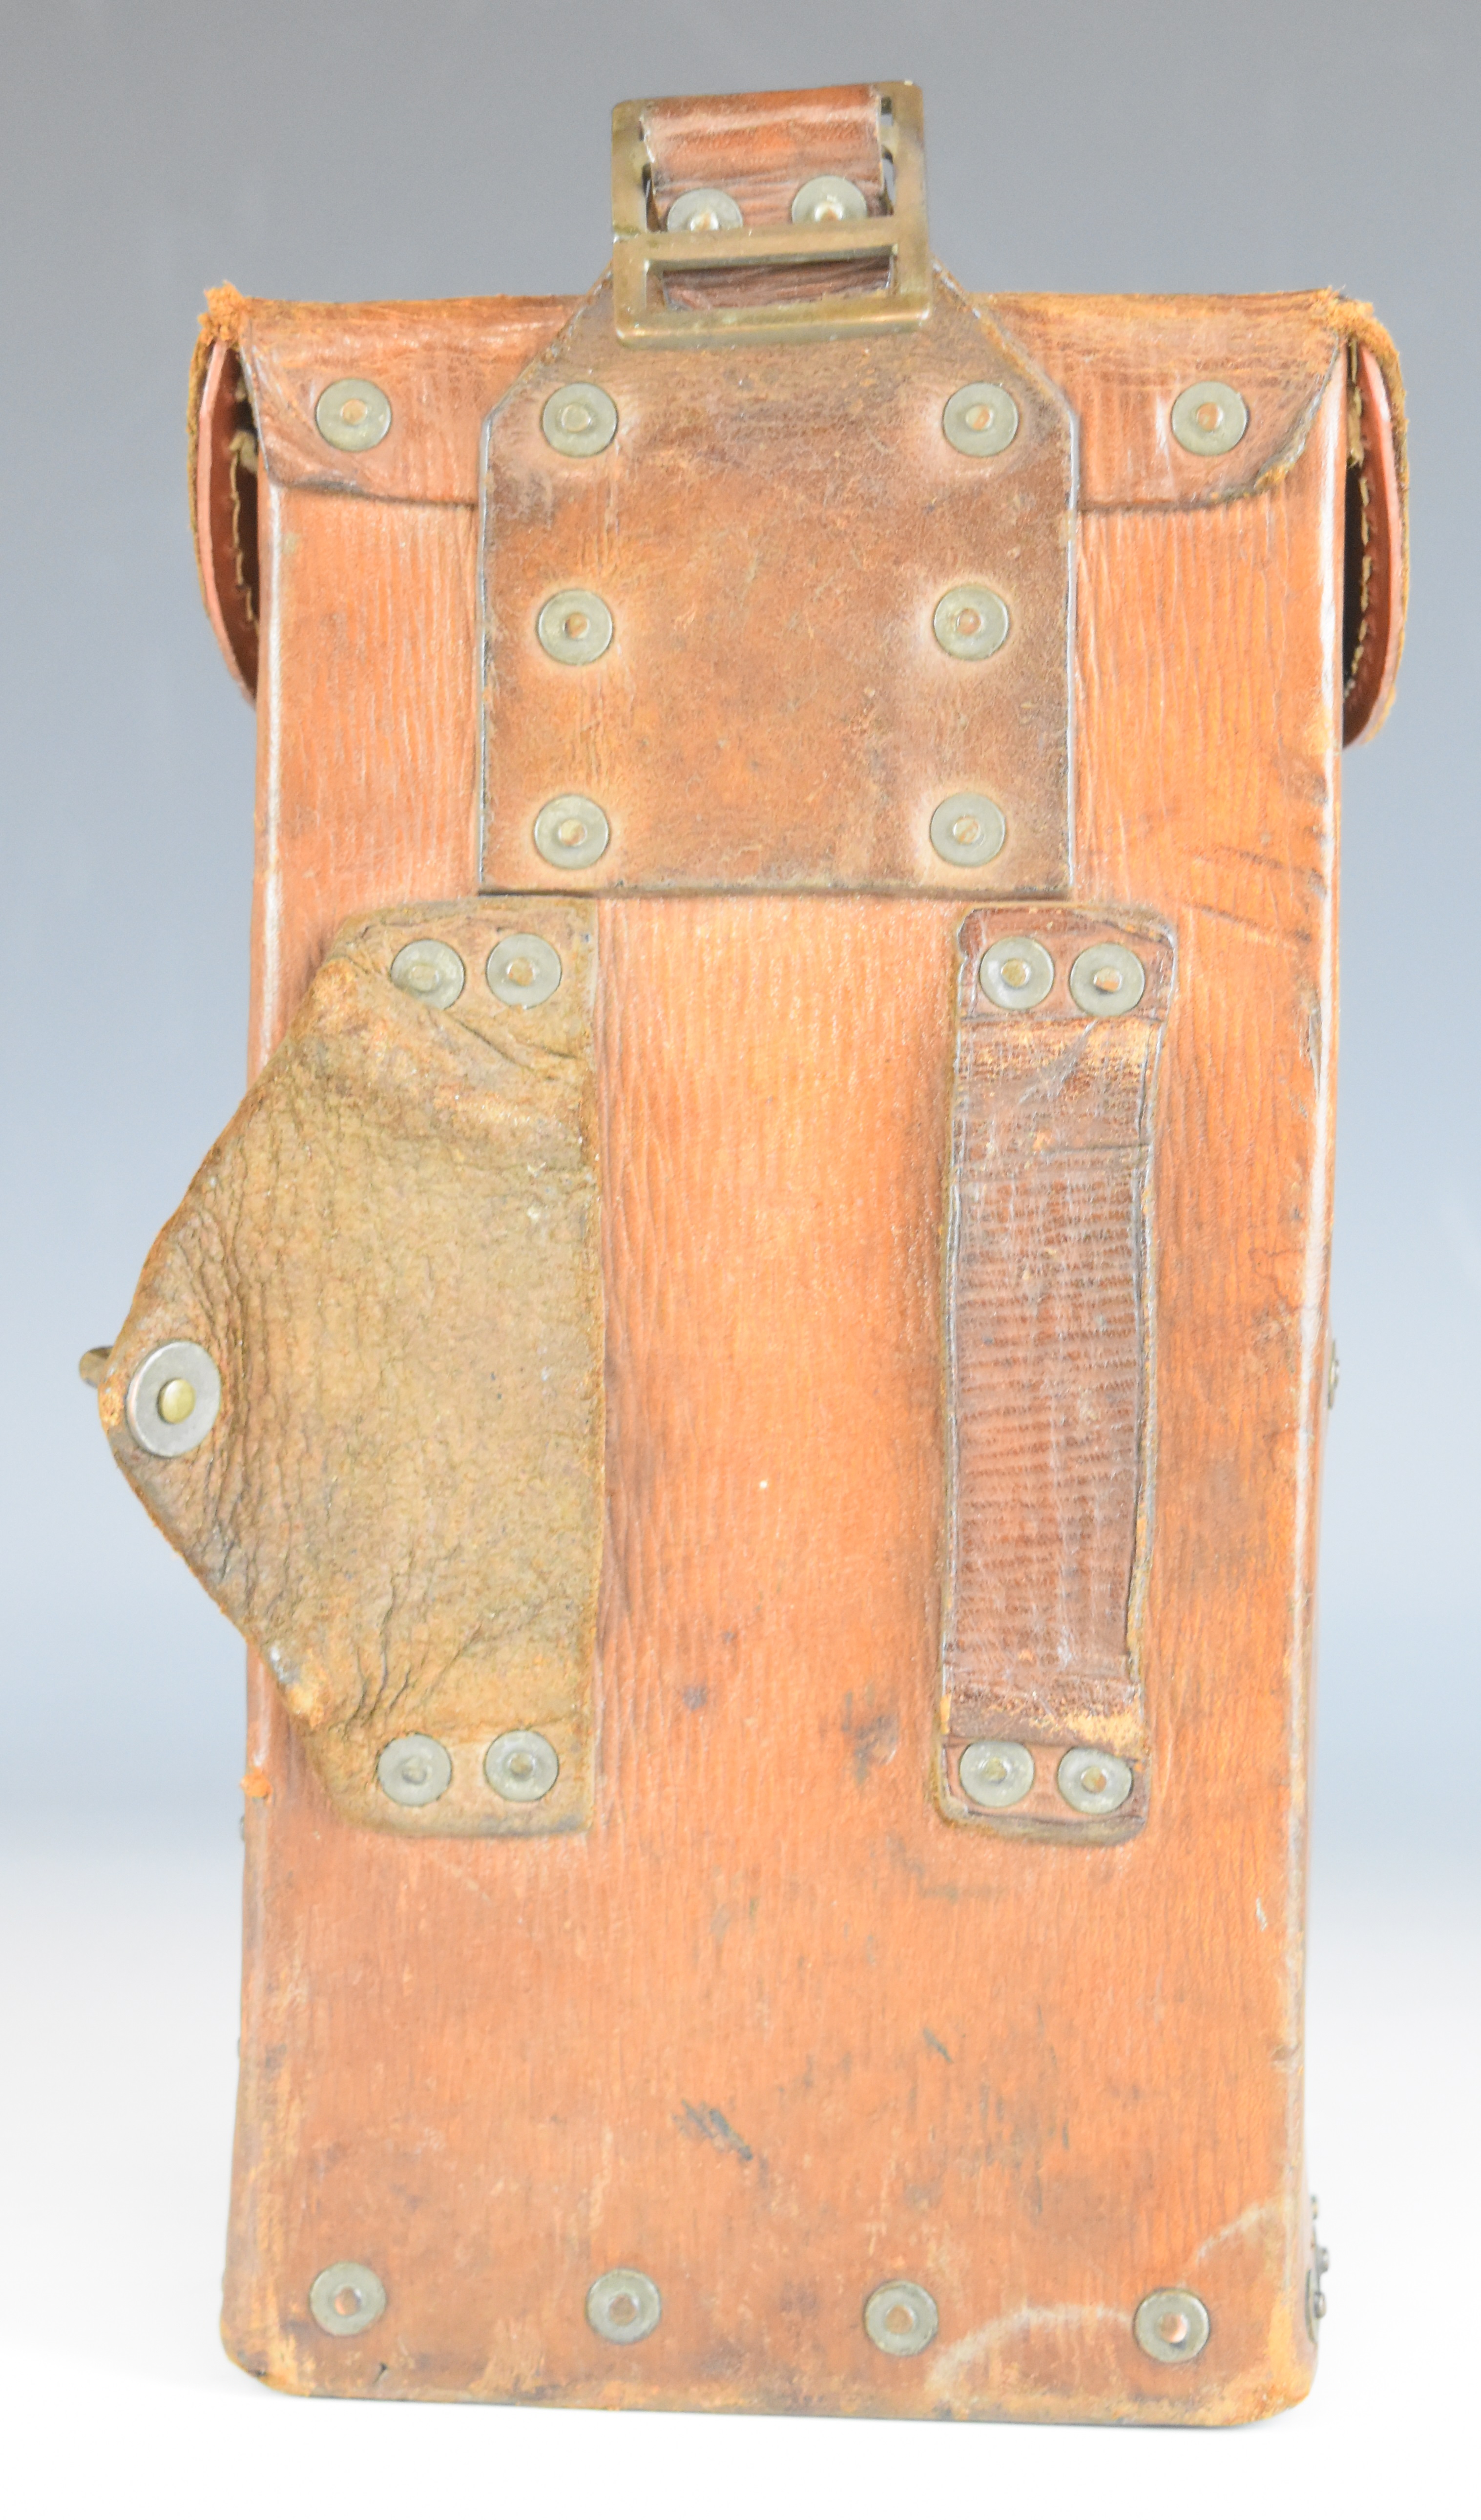 WW2 British army leather magazine pouch or holster with brass fittings, 24 x 12 x 7.5cm. - Image 4 of 6